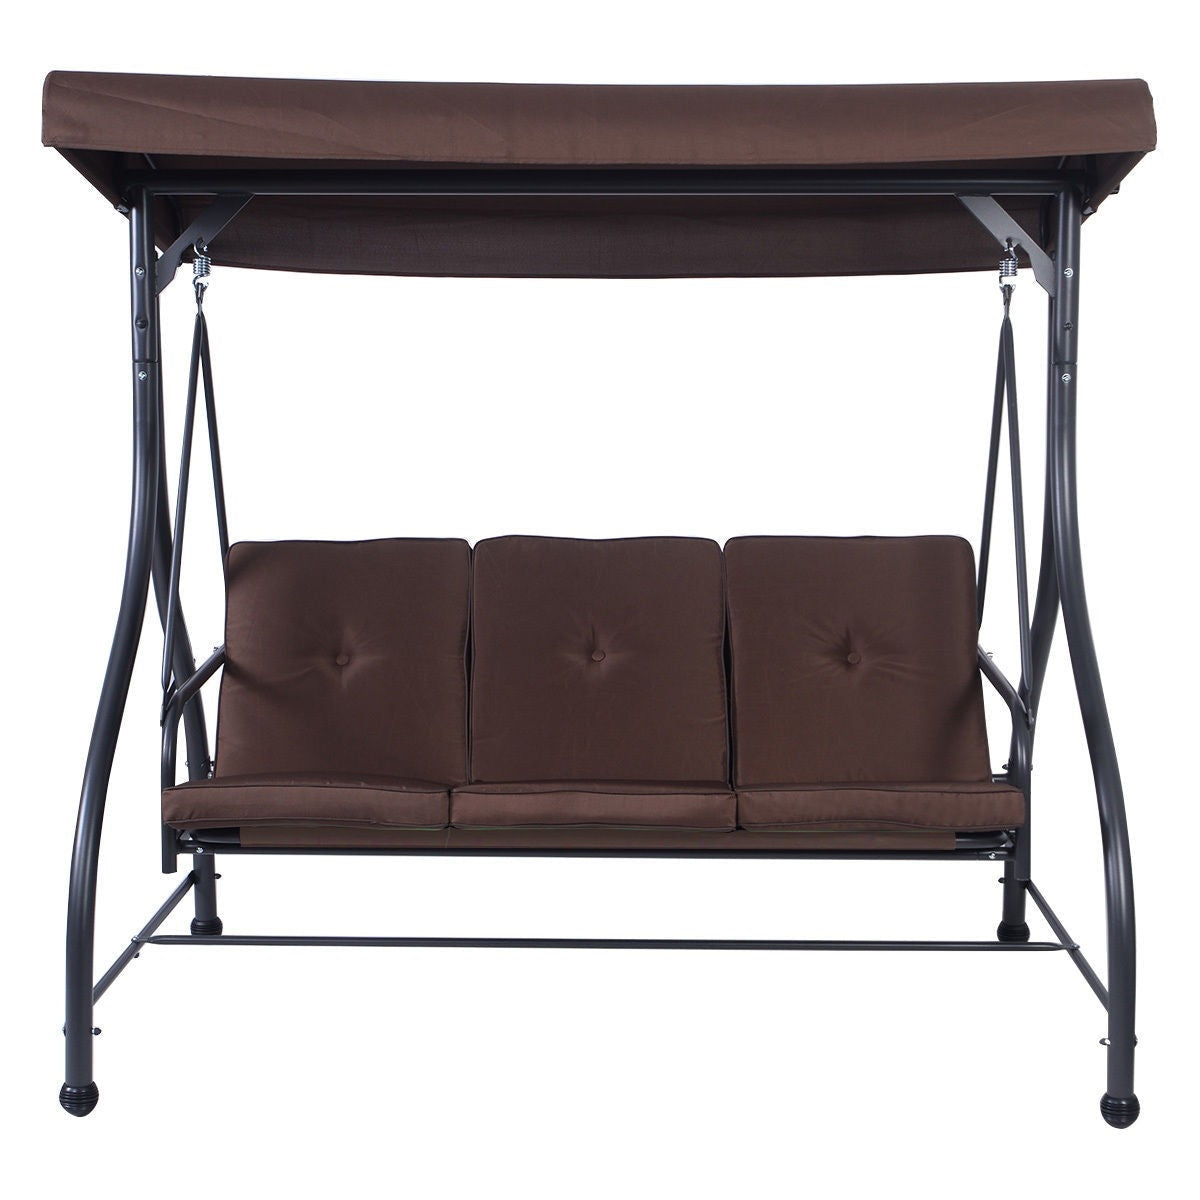 Temporarily Paused Products - Brown Adjustable 3 Seat Cushioned Porch Patio Canopy Swing Chair